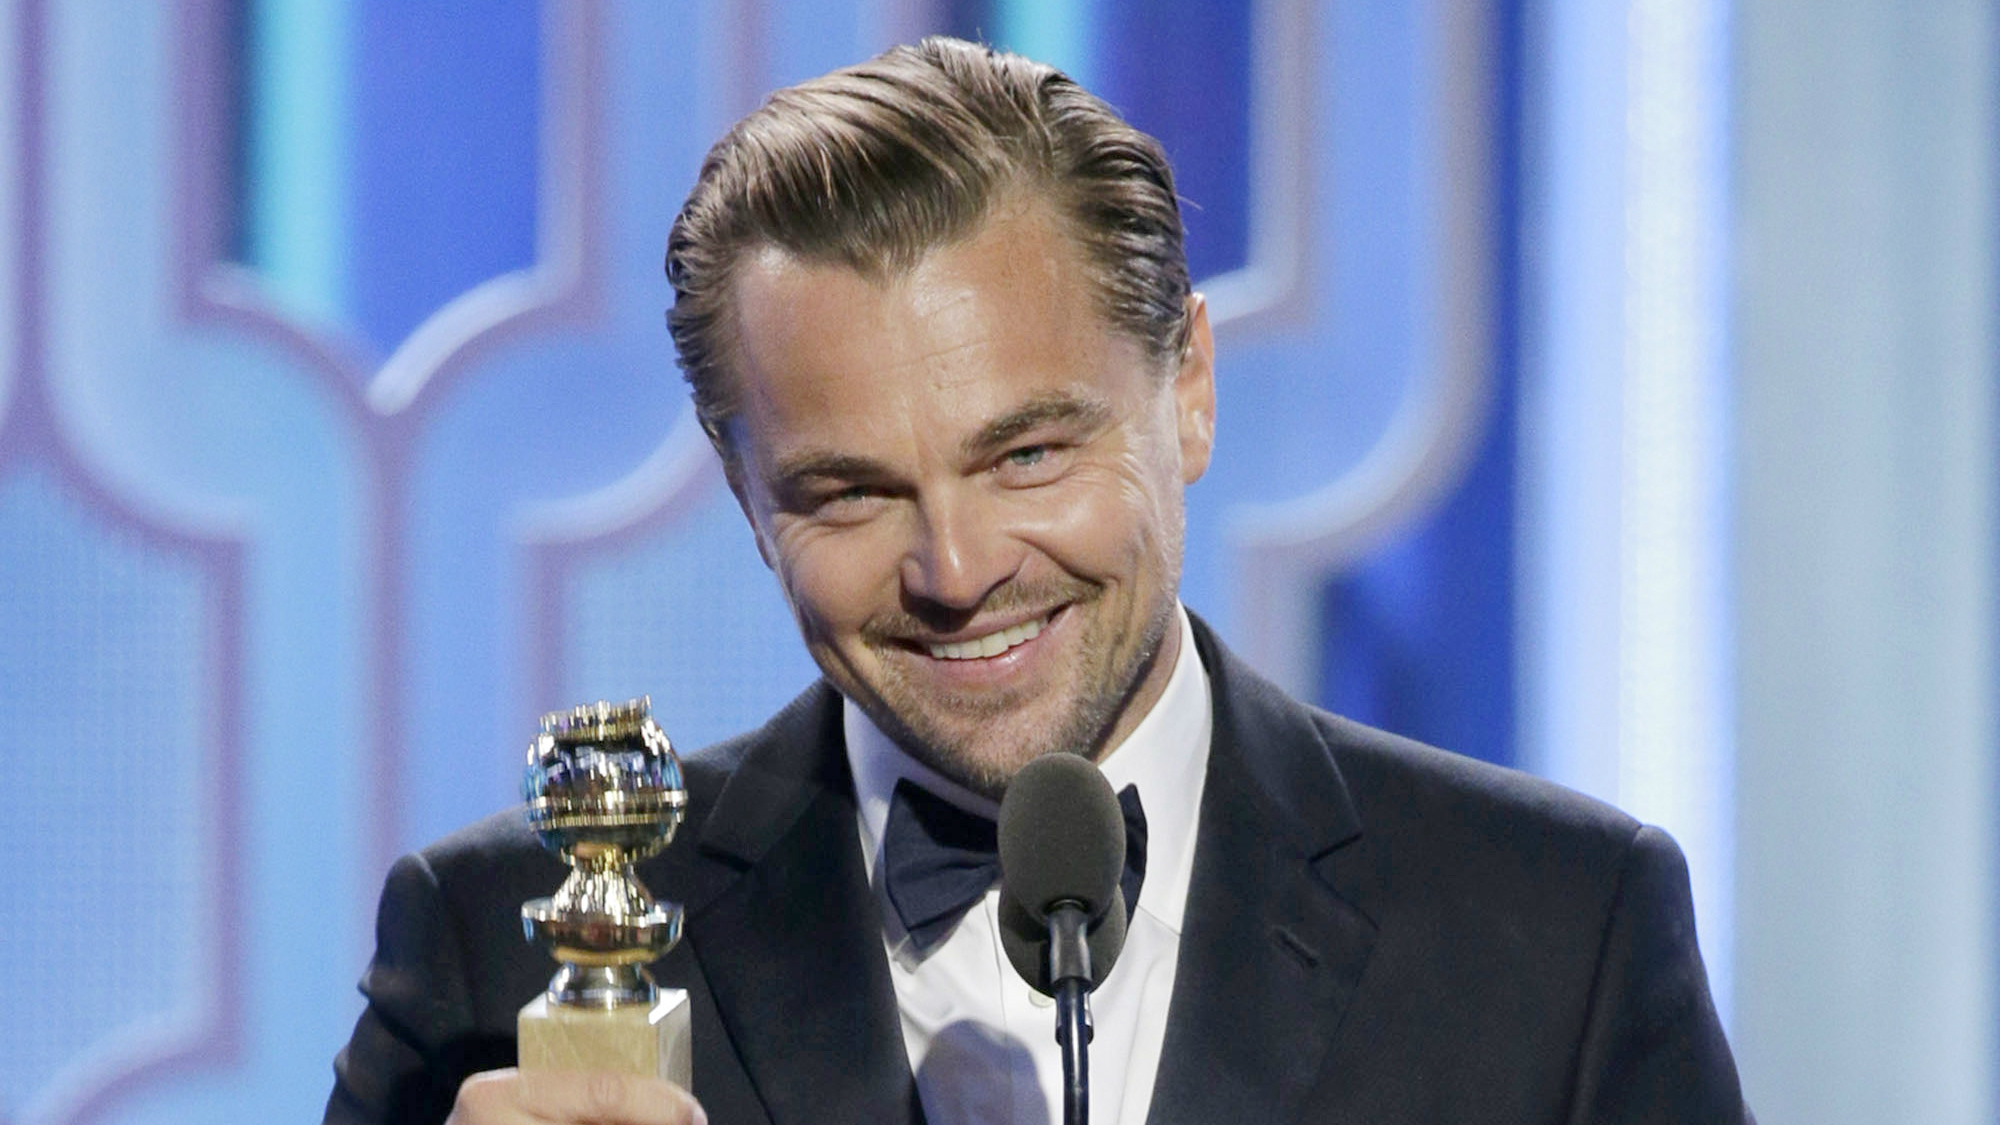 How can you watch the Golden Globe Awards live?